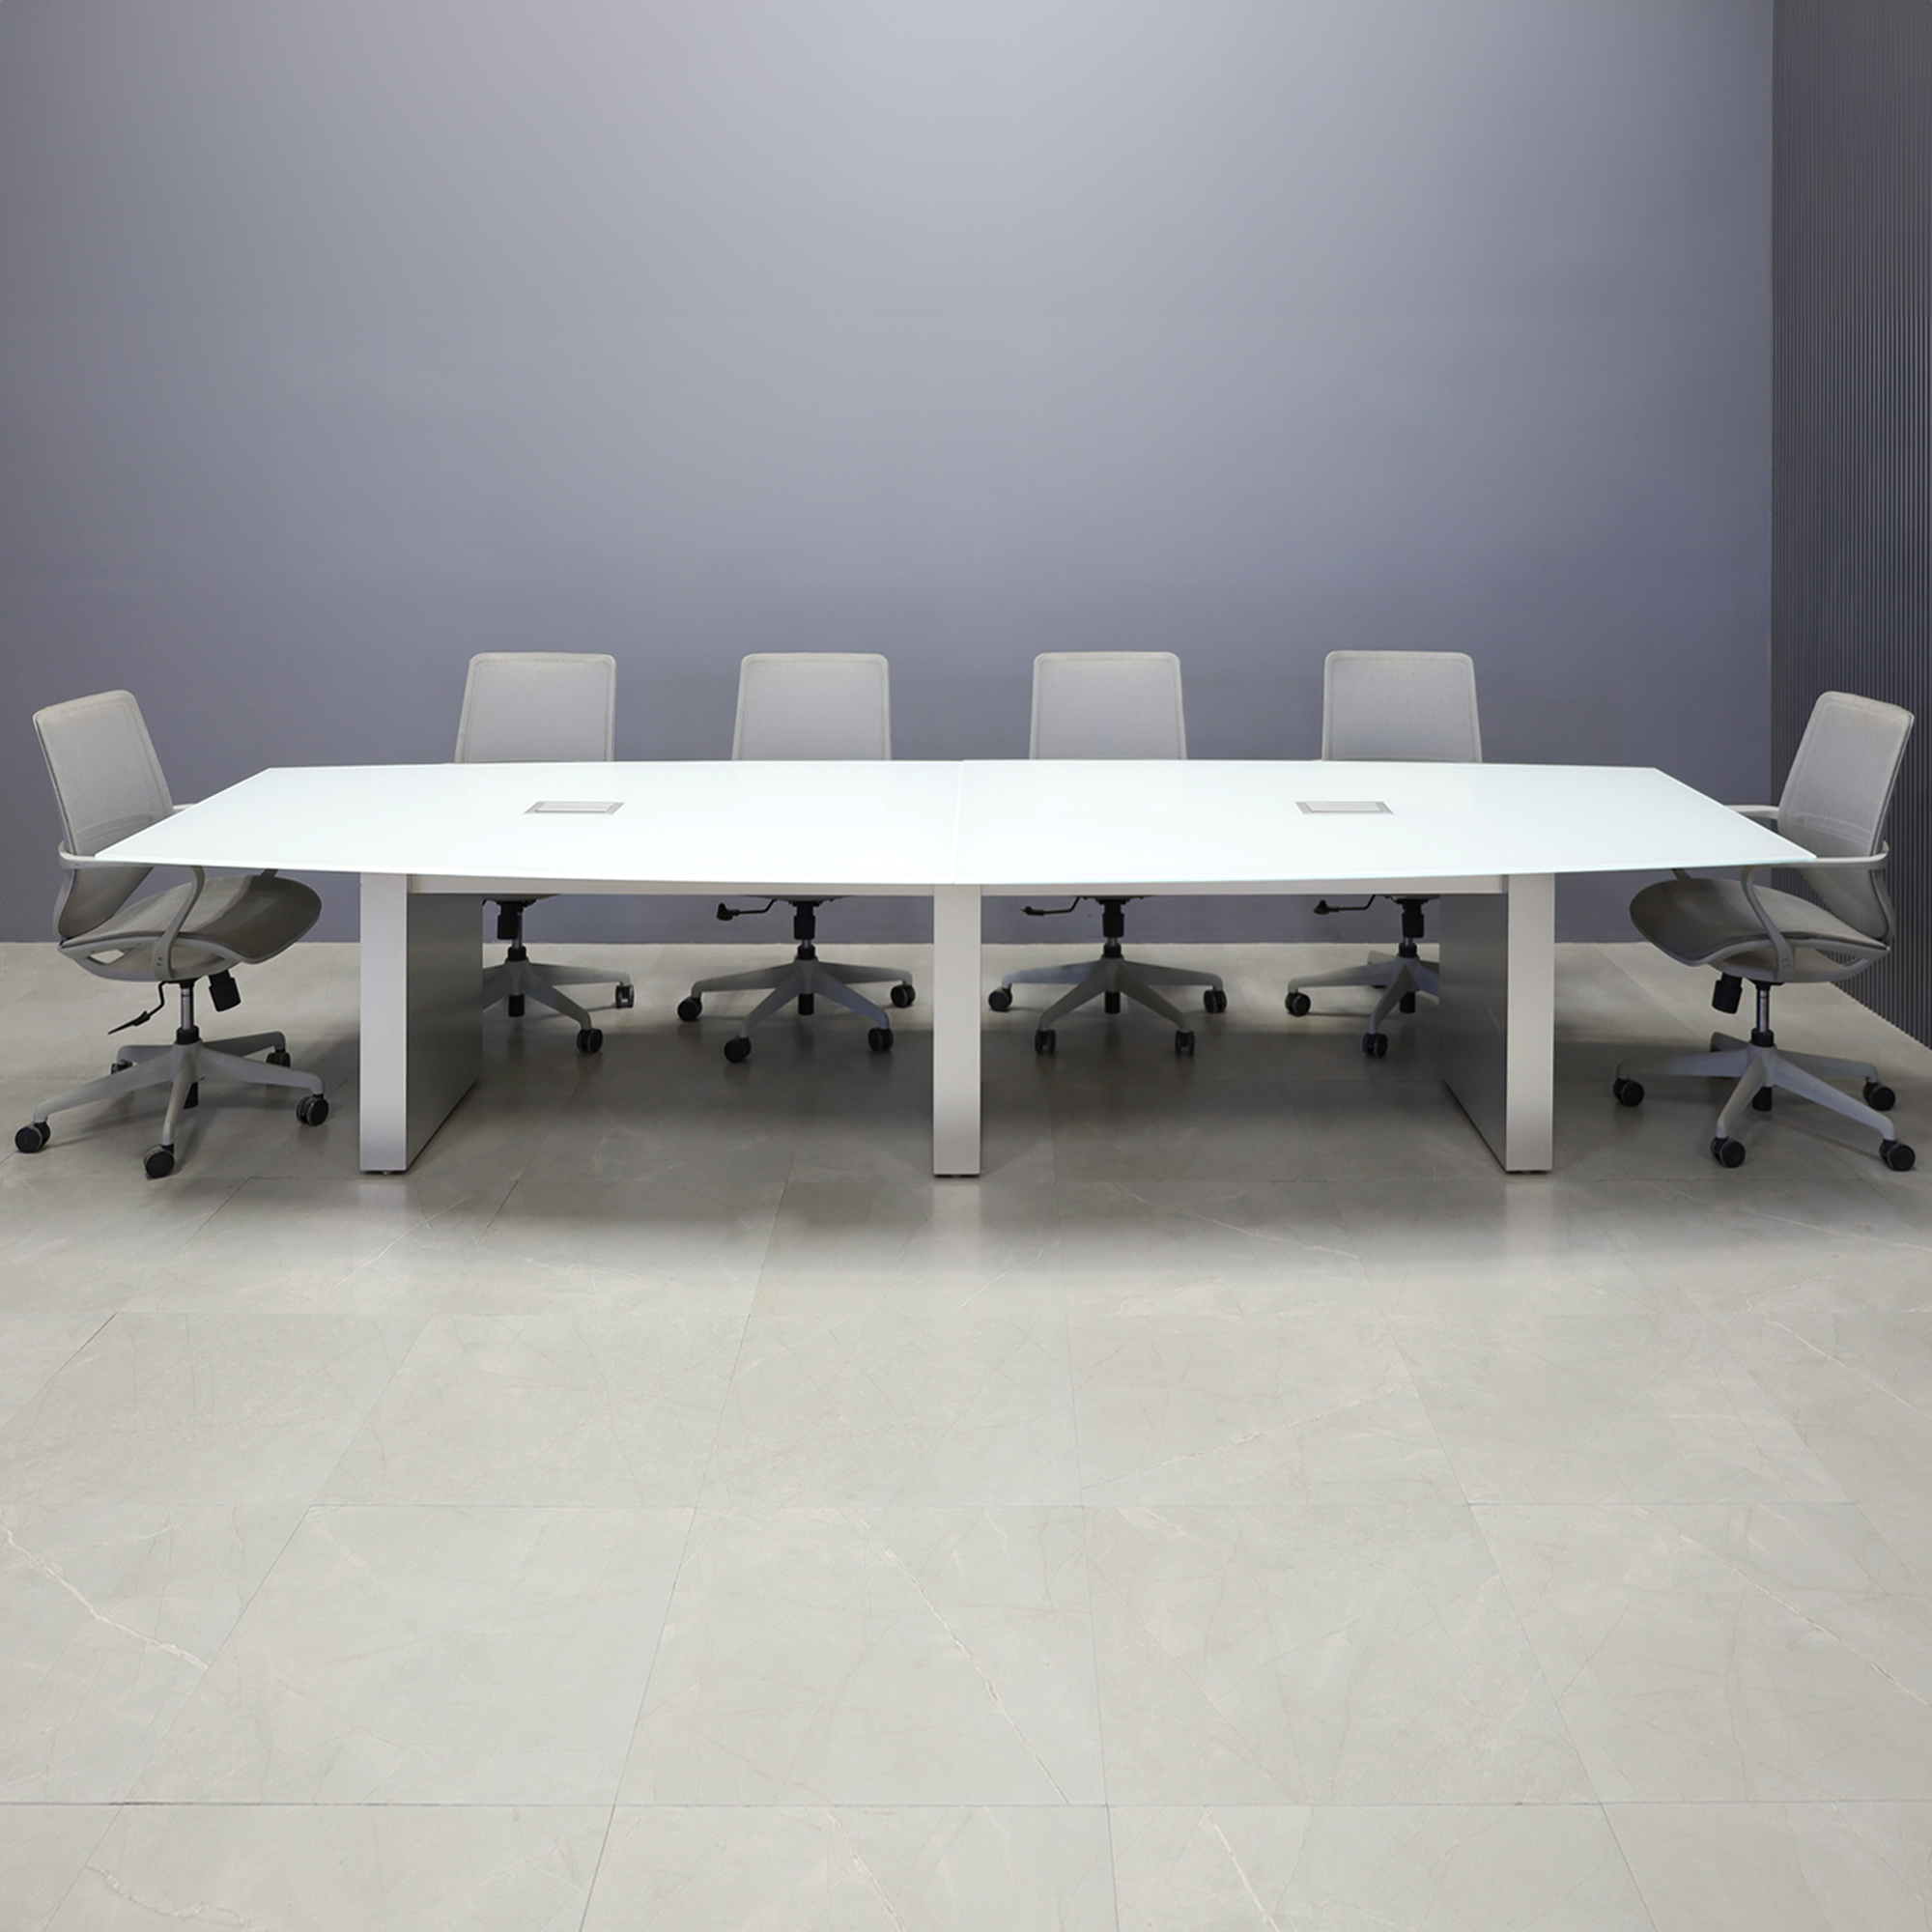 144-inch Omaha Boat Conference Table in 1/2